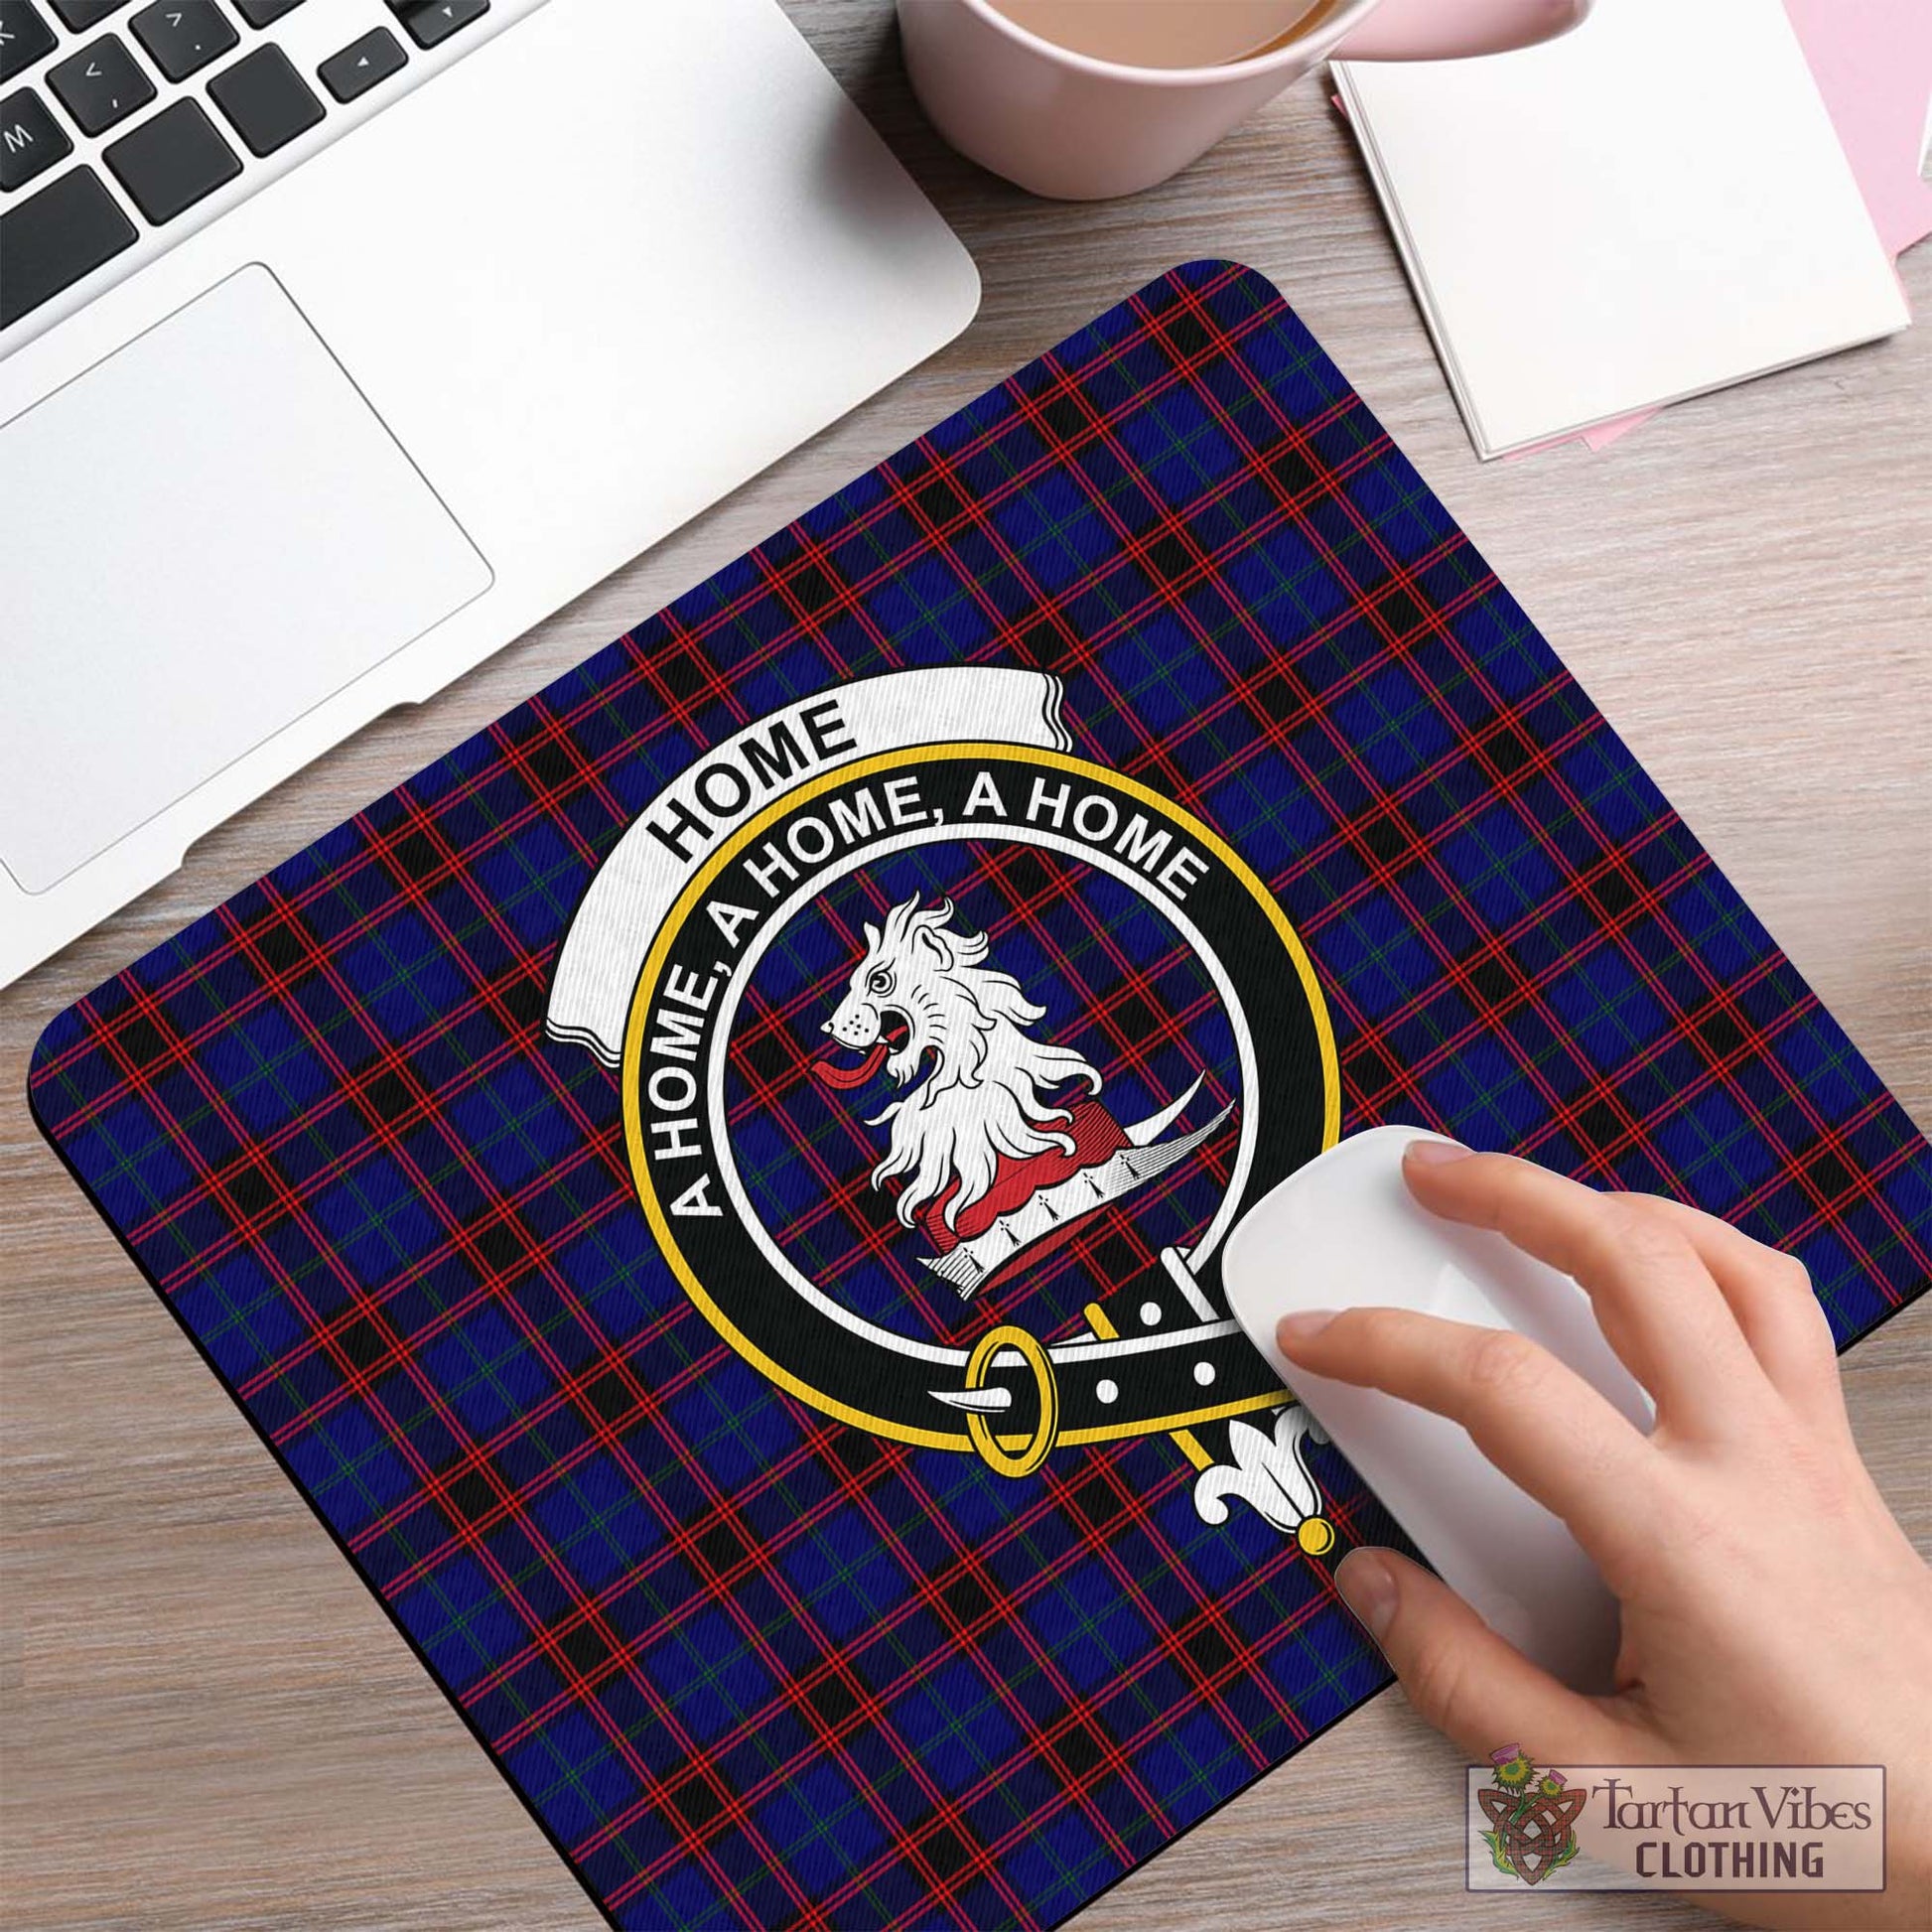 Tartan Vibes Clothing Home Modern Tartan Mouse Pad with Family Crest